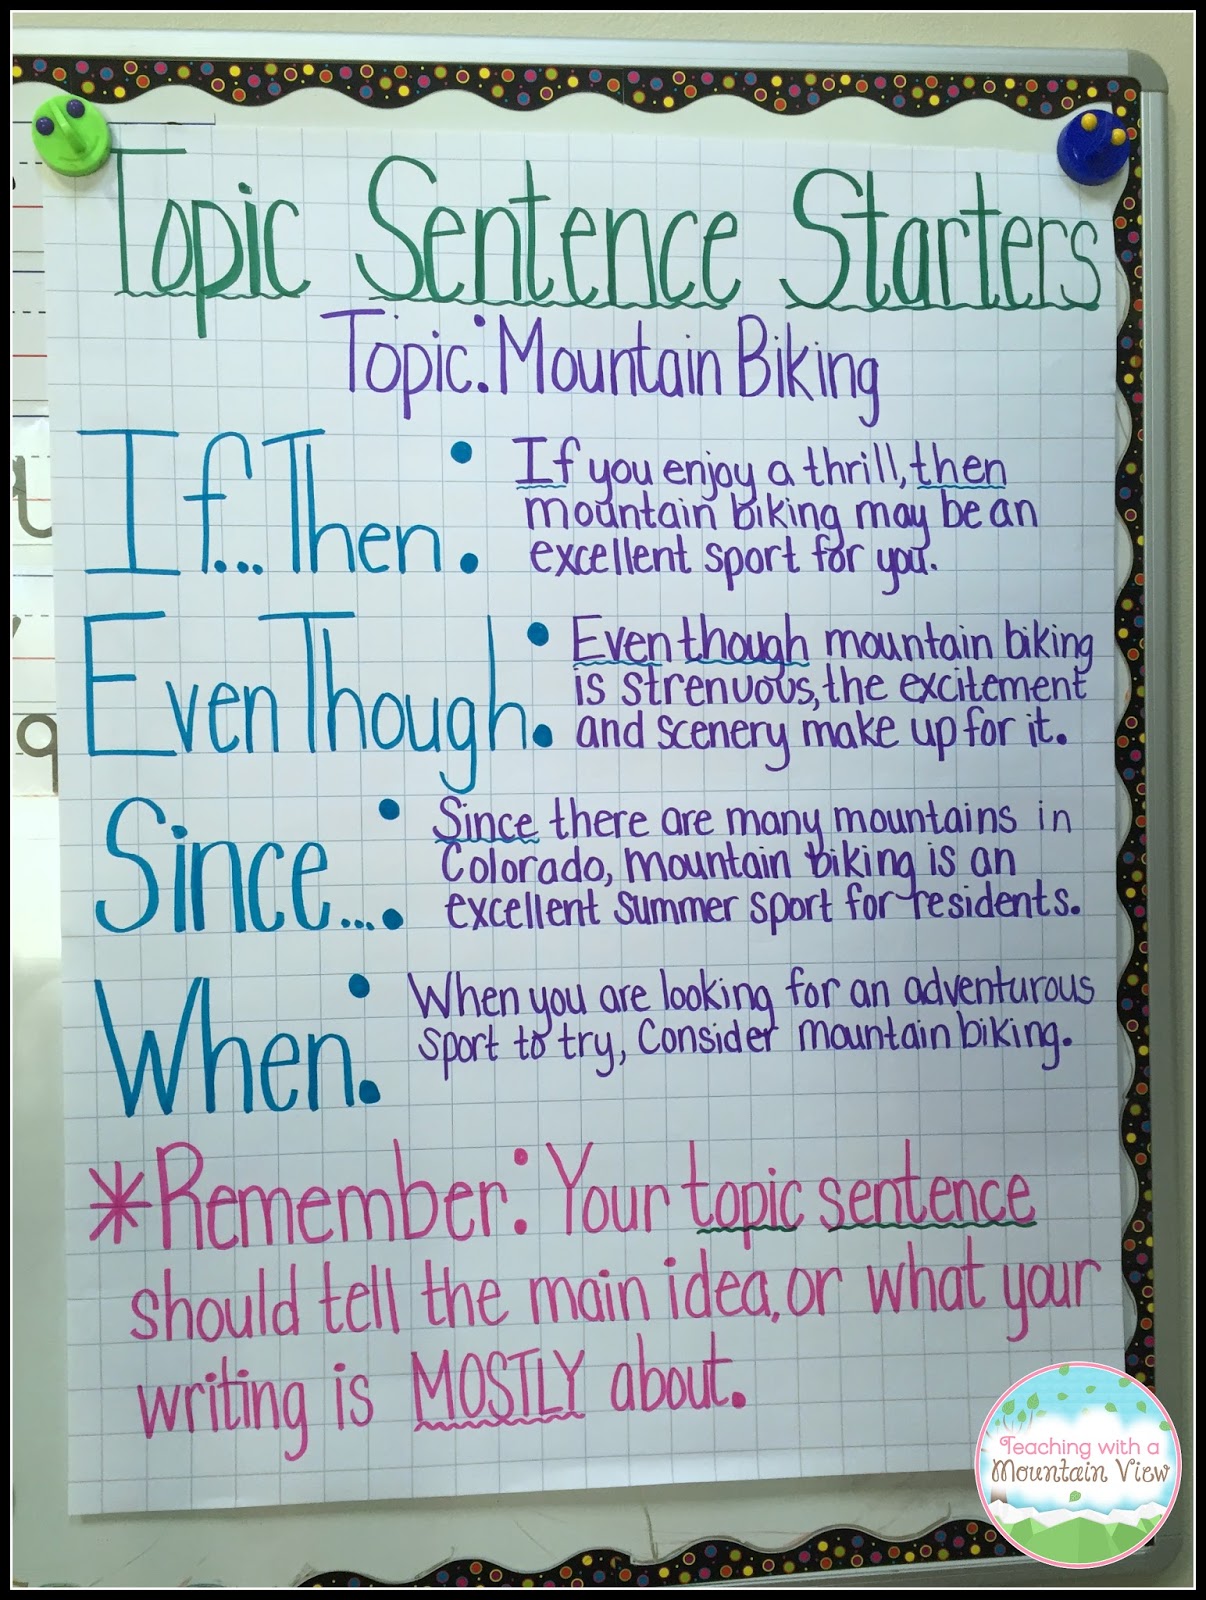 how to write a topic sentence 6th grade